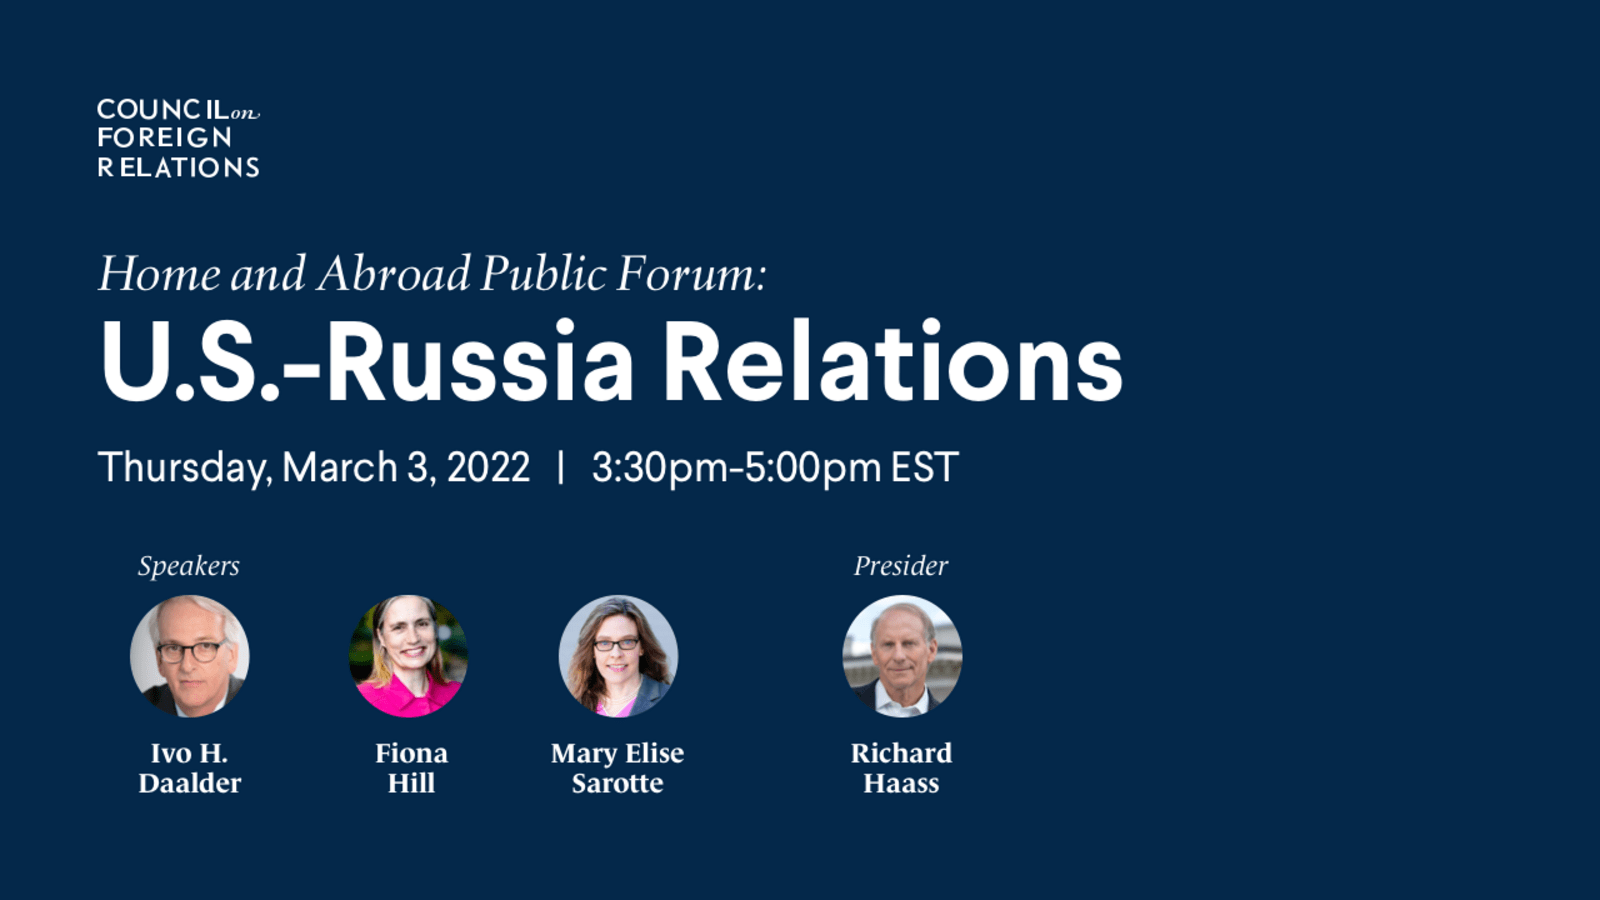 Home and Abroad Public Forum U.S.-Russia Relations Council on Foreign Relations